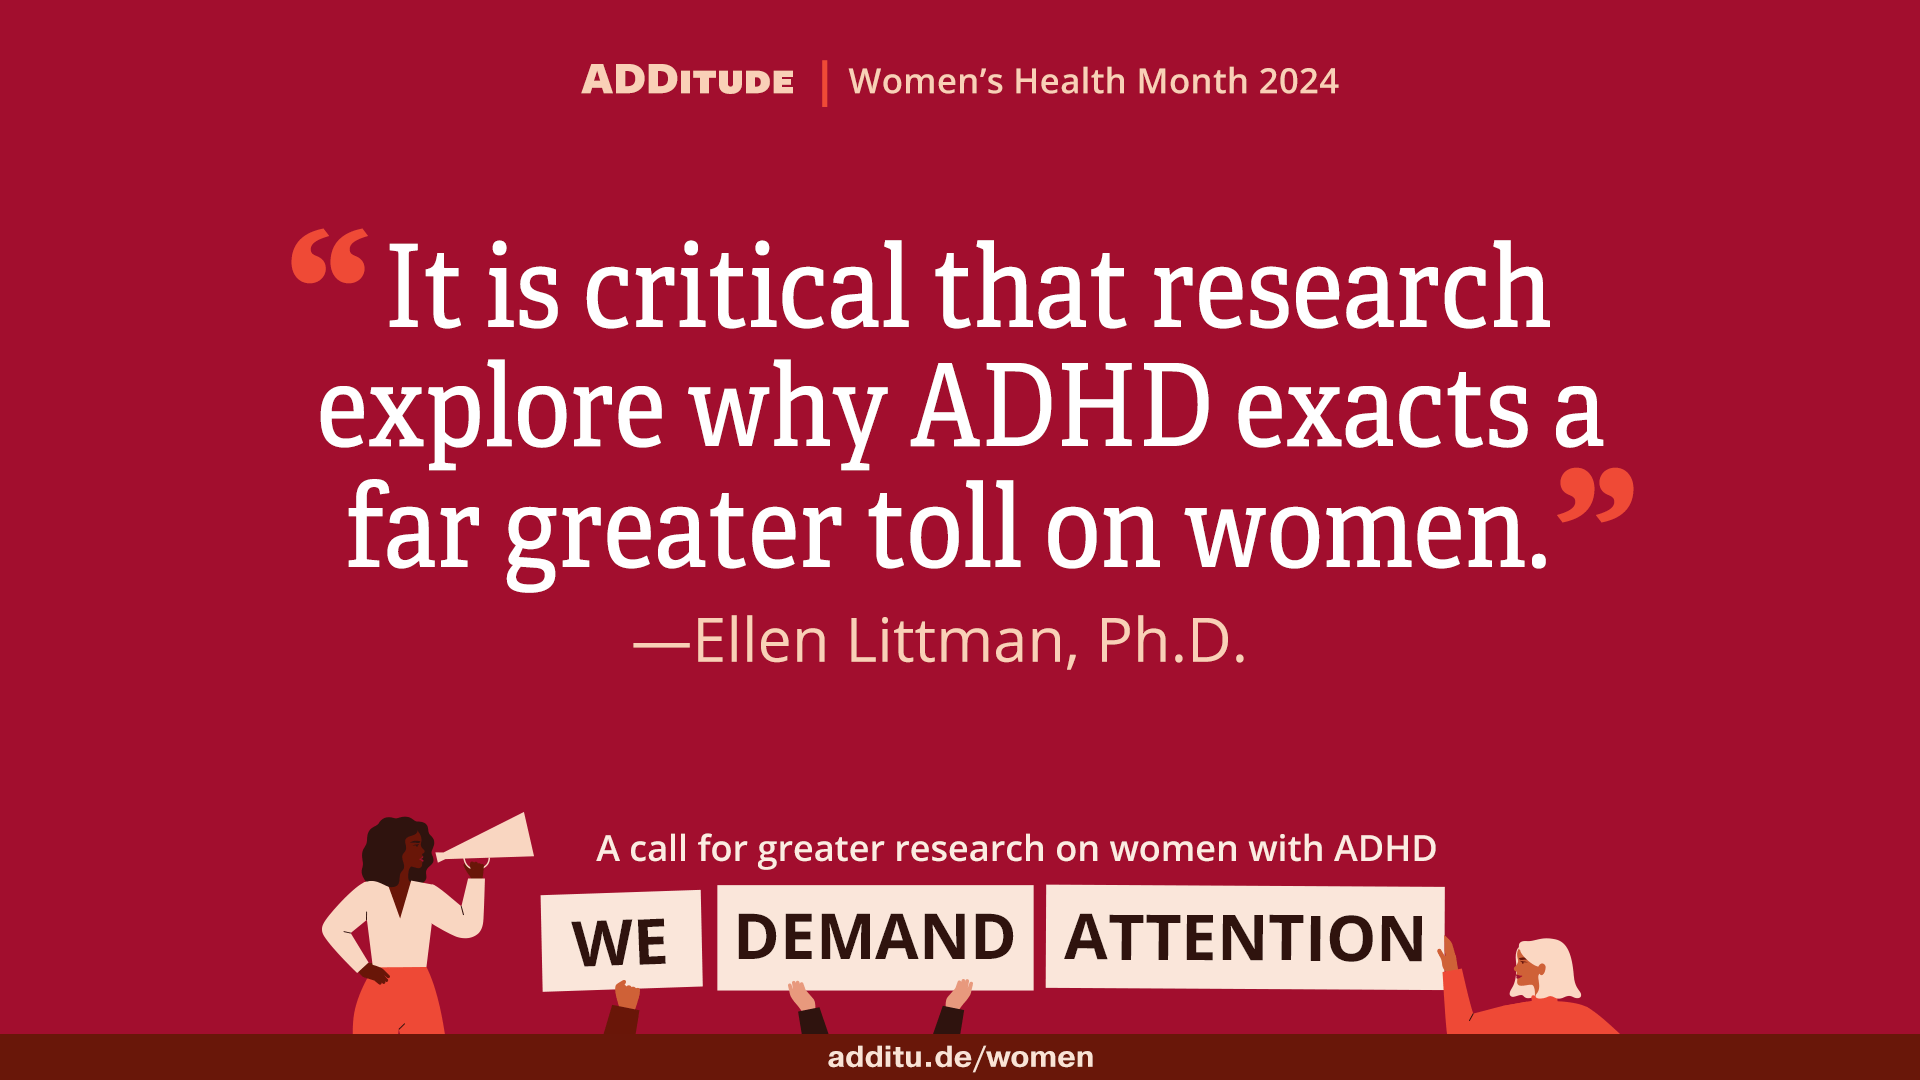 An image of a quote from Dr. Ellen Littman that reads: "It is critical that research explore why ADHD exacts a far greater toll on women"